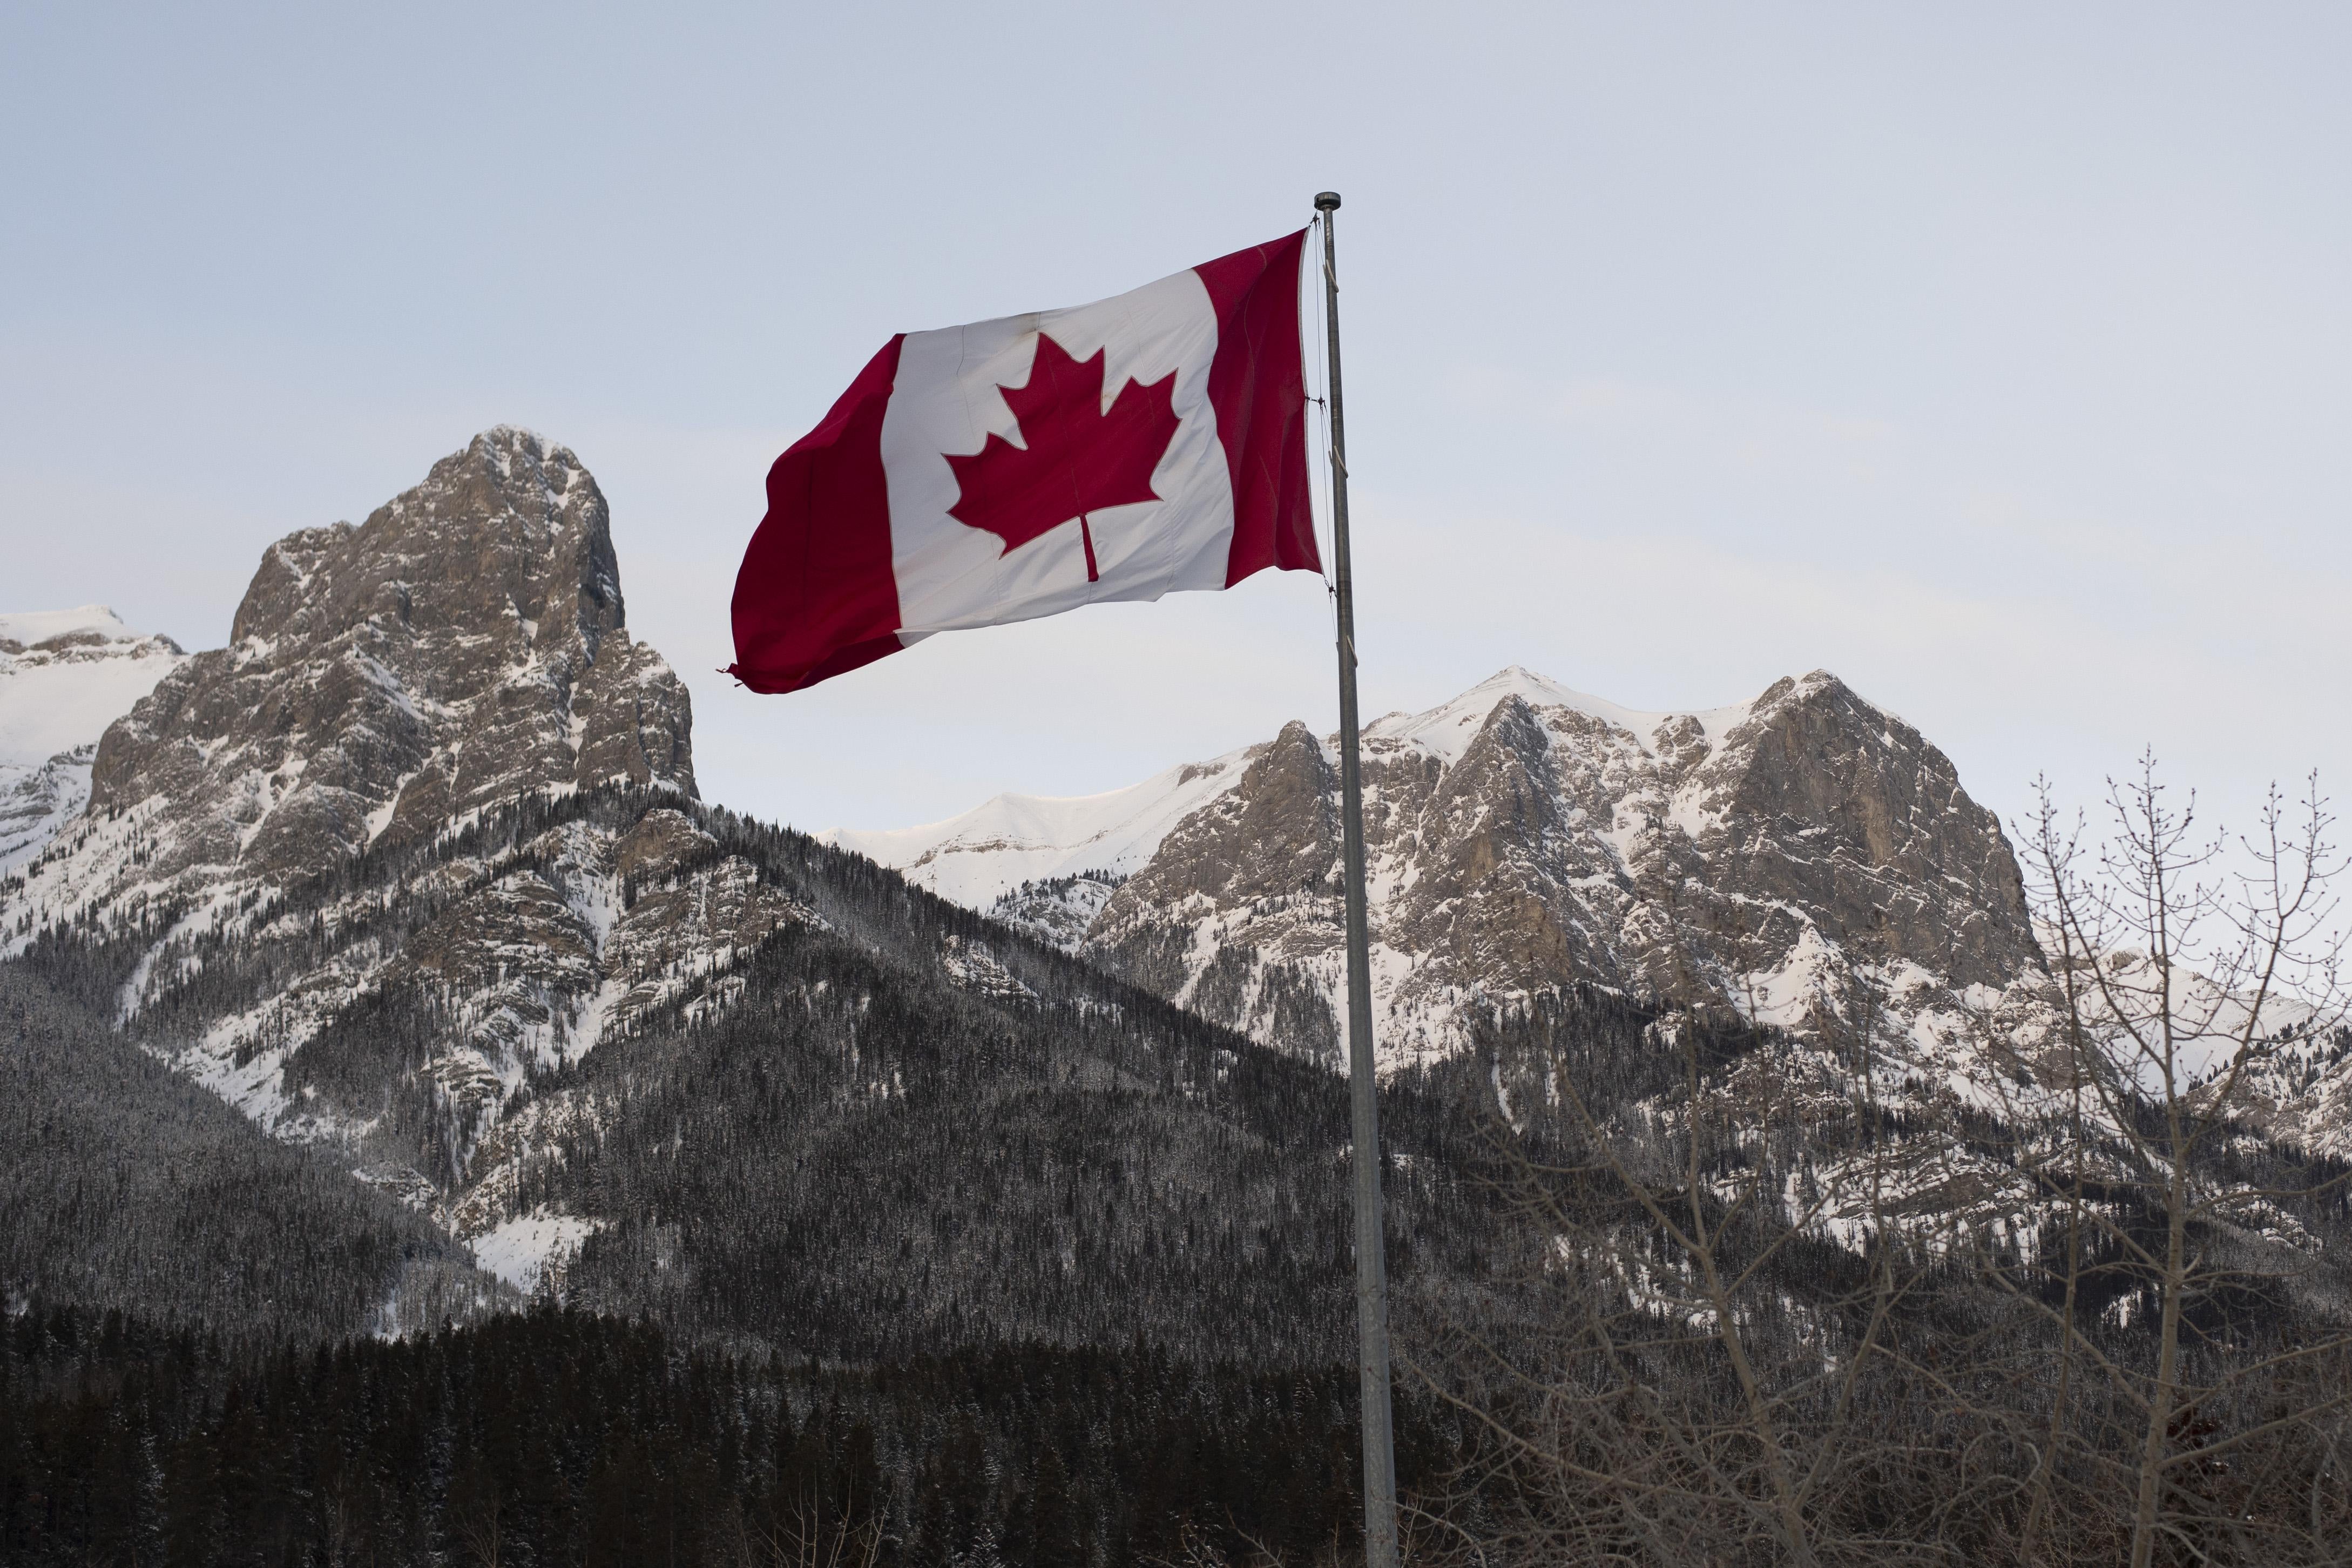 The Canadian flag flies over the Canadian Rockies.